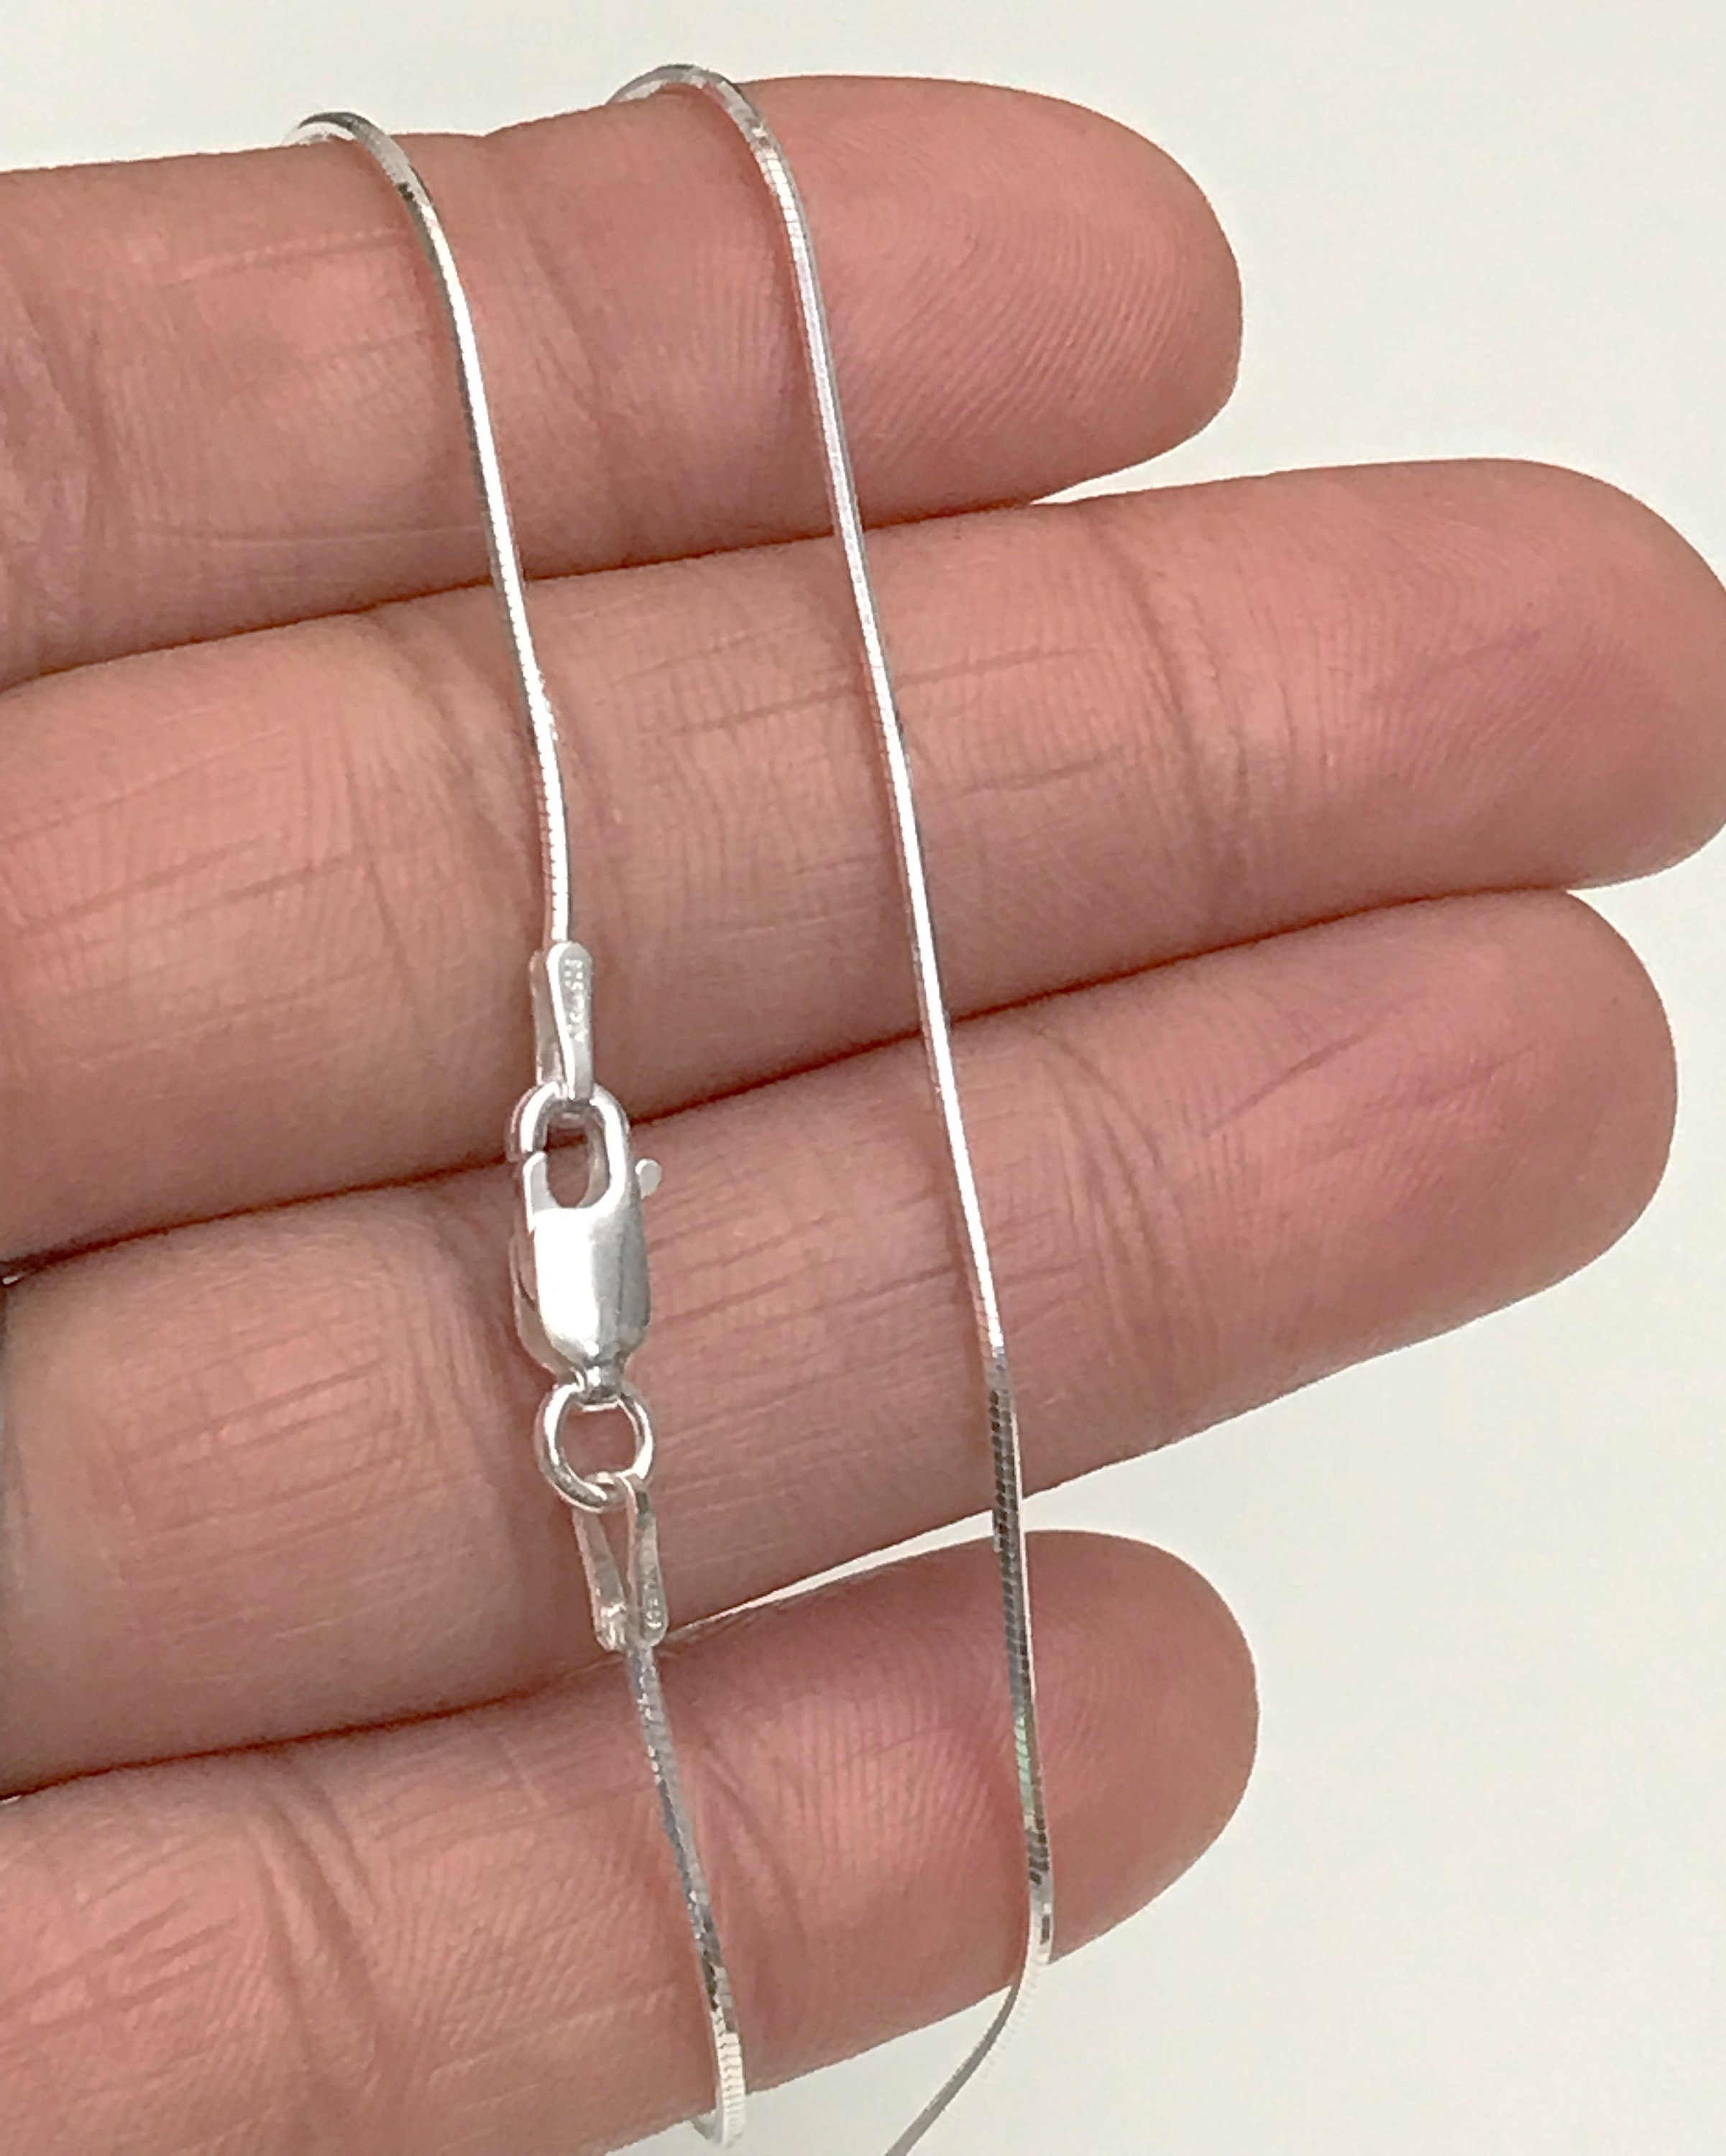 Sterling Silver 1mm Diamond-Cut Snake Chain Necklace Solid Italian